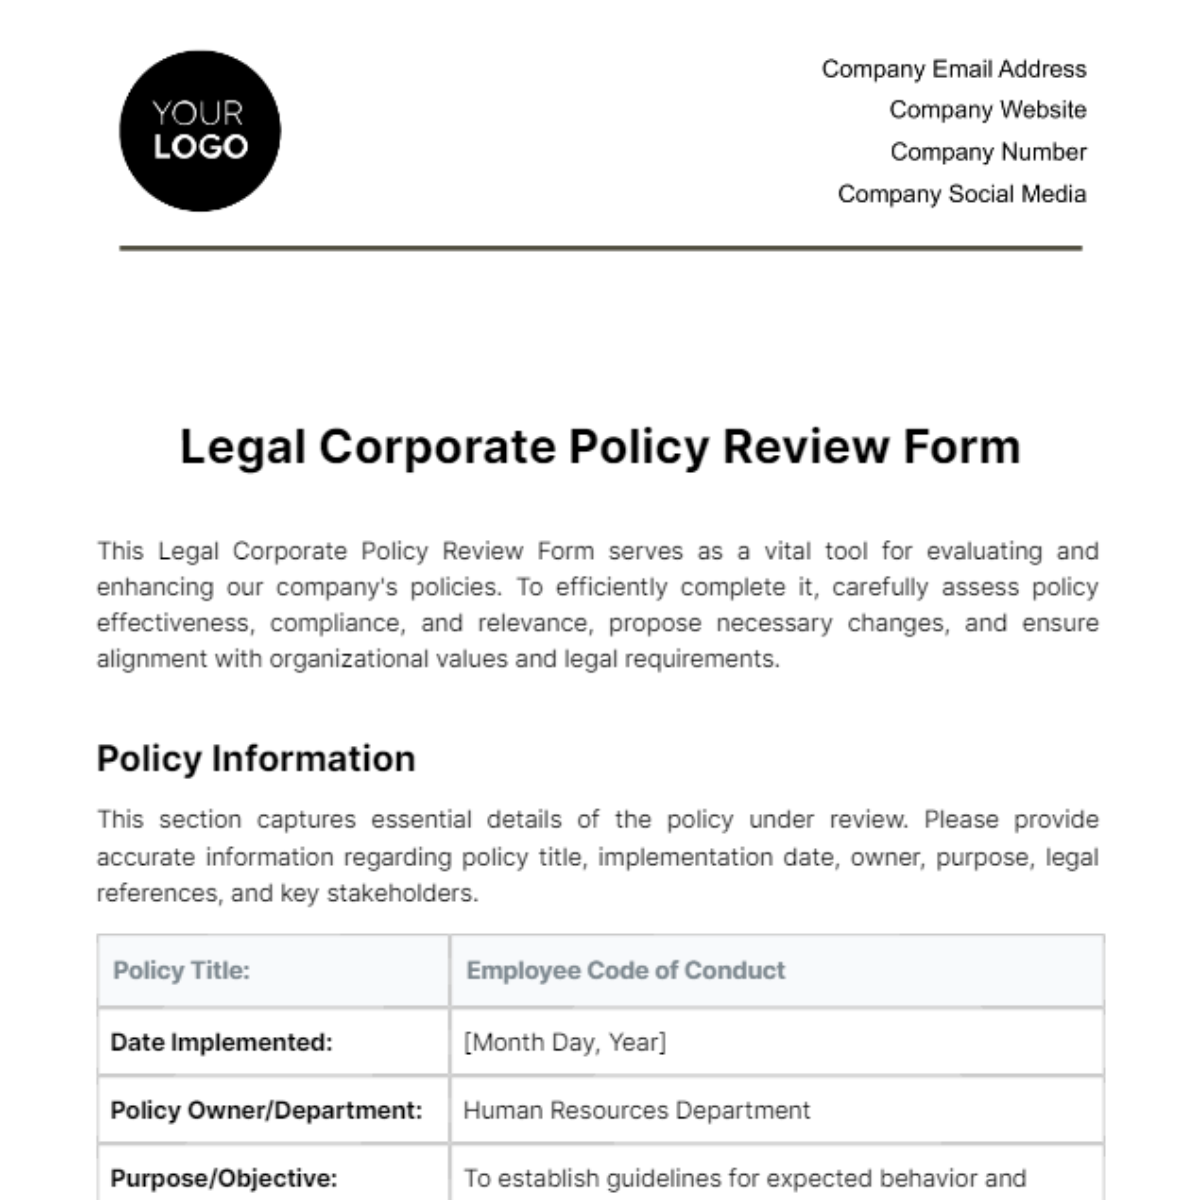 Free Legal Corporate Policy Review Form Template